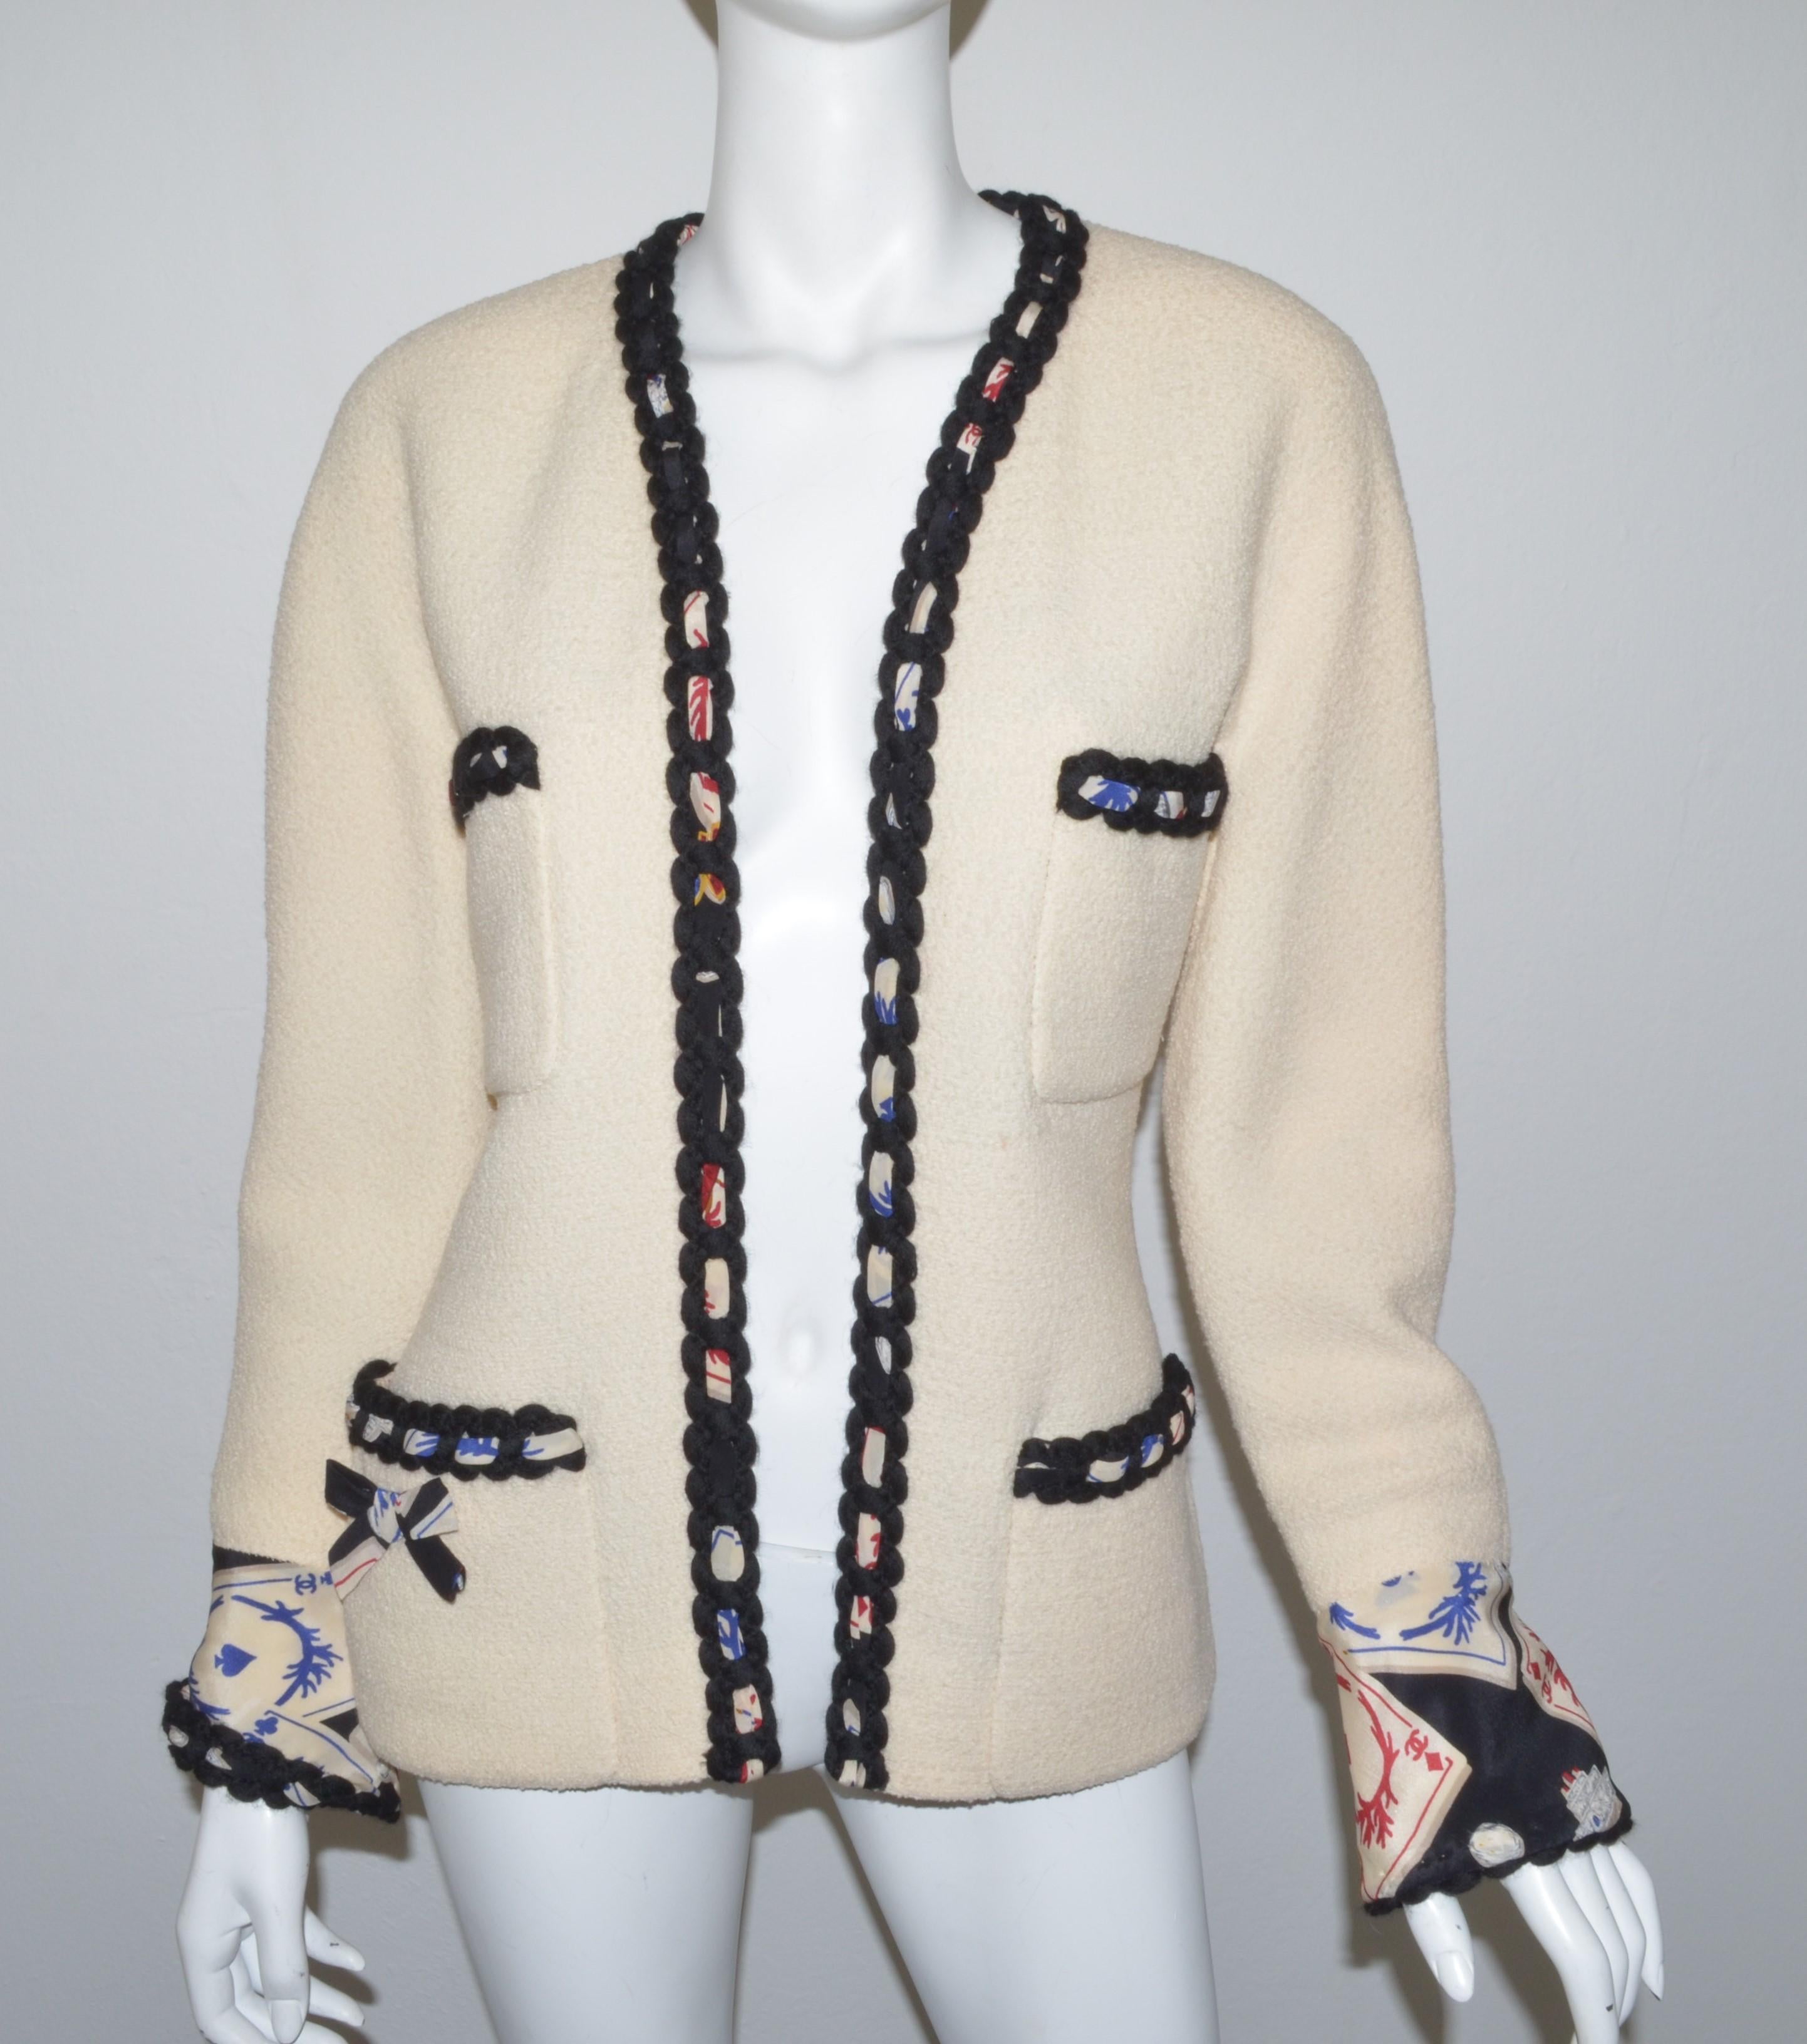 1995 Vintage Chanel Tweed Jacket with Playing Cards Motif -- Jacket is featured in a cream color with a black knitted trimming and playing cards motif lining. Jacket has two functional front pockets and full lining. Excellent condition with a very